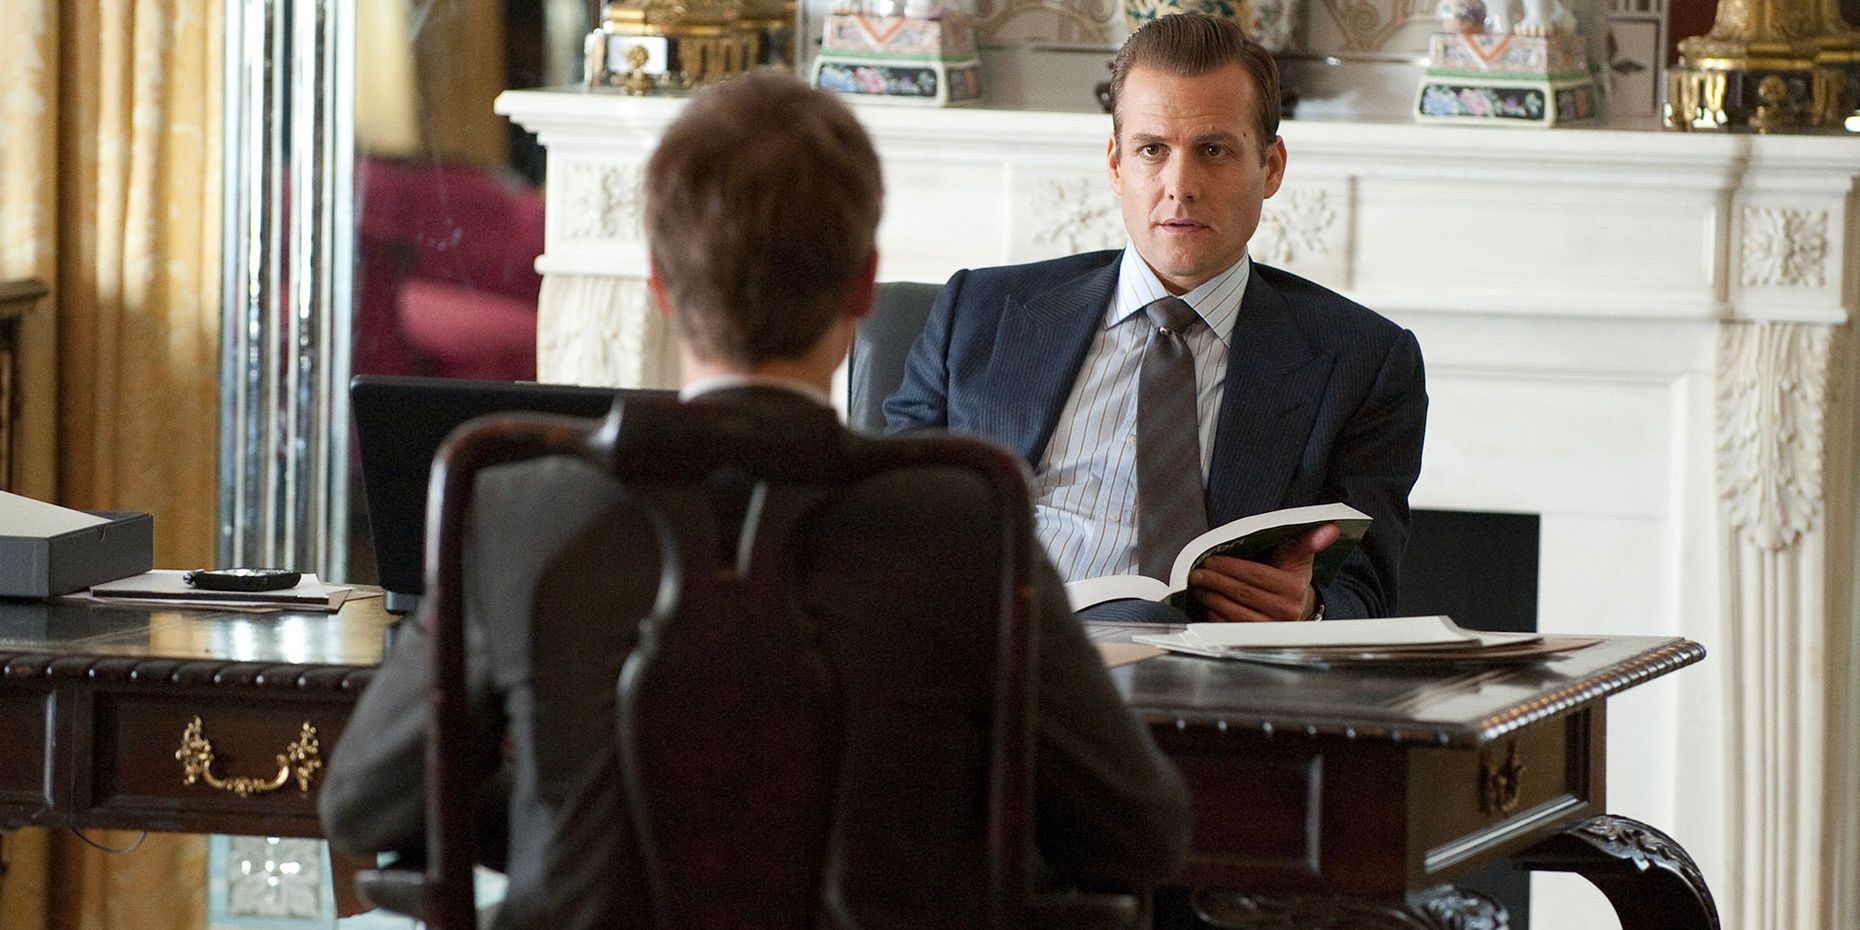 Harvey Spectre (Gabriel Macht) meets Mike Ross (Patrick J. Adams) for the very first time